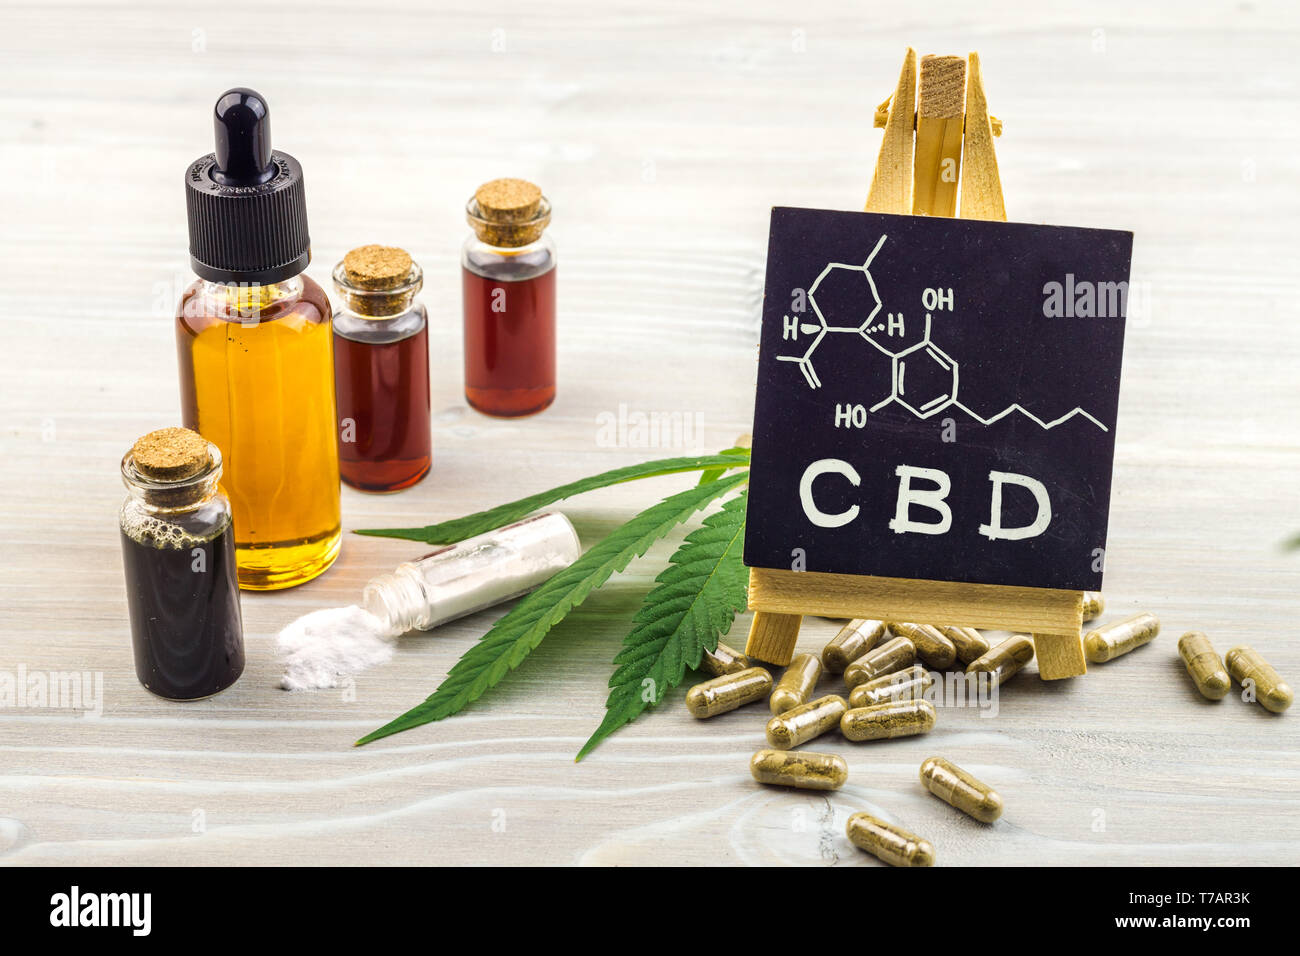 full-spectrum-cannabidiol-cbd-oils-capsules-and-crystals-isolate-with-small-blackboard-with-cbd-word-and-chemical-structure-on-wooden-backdrop-T7AR3K.jpg